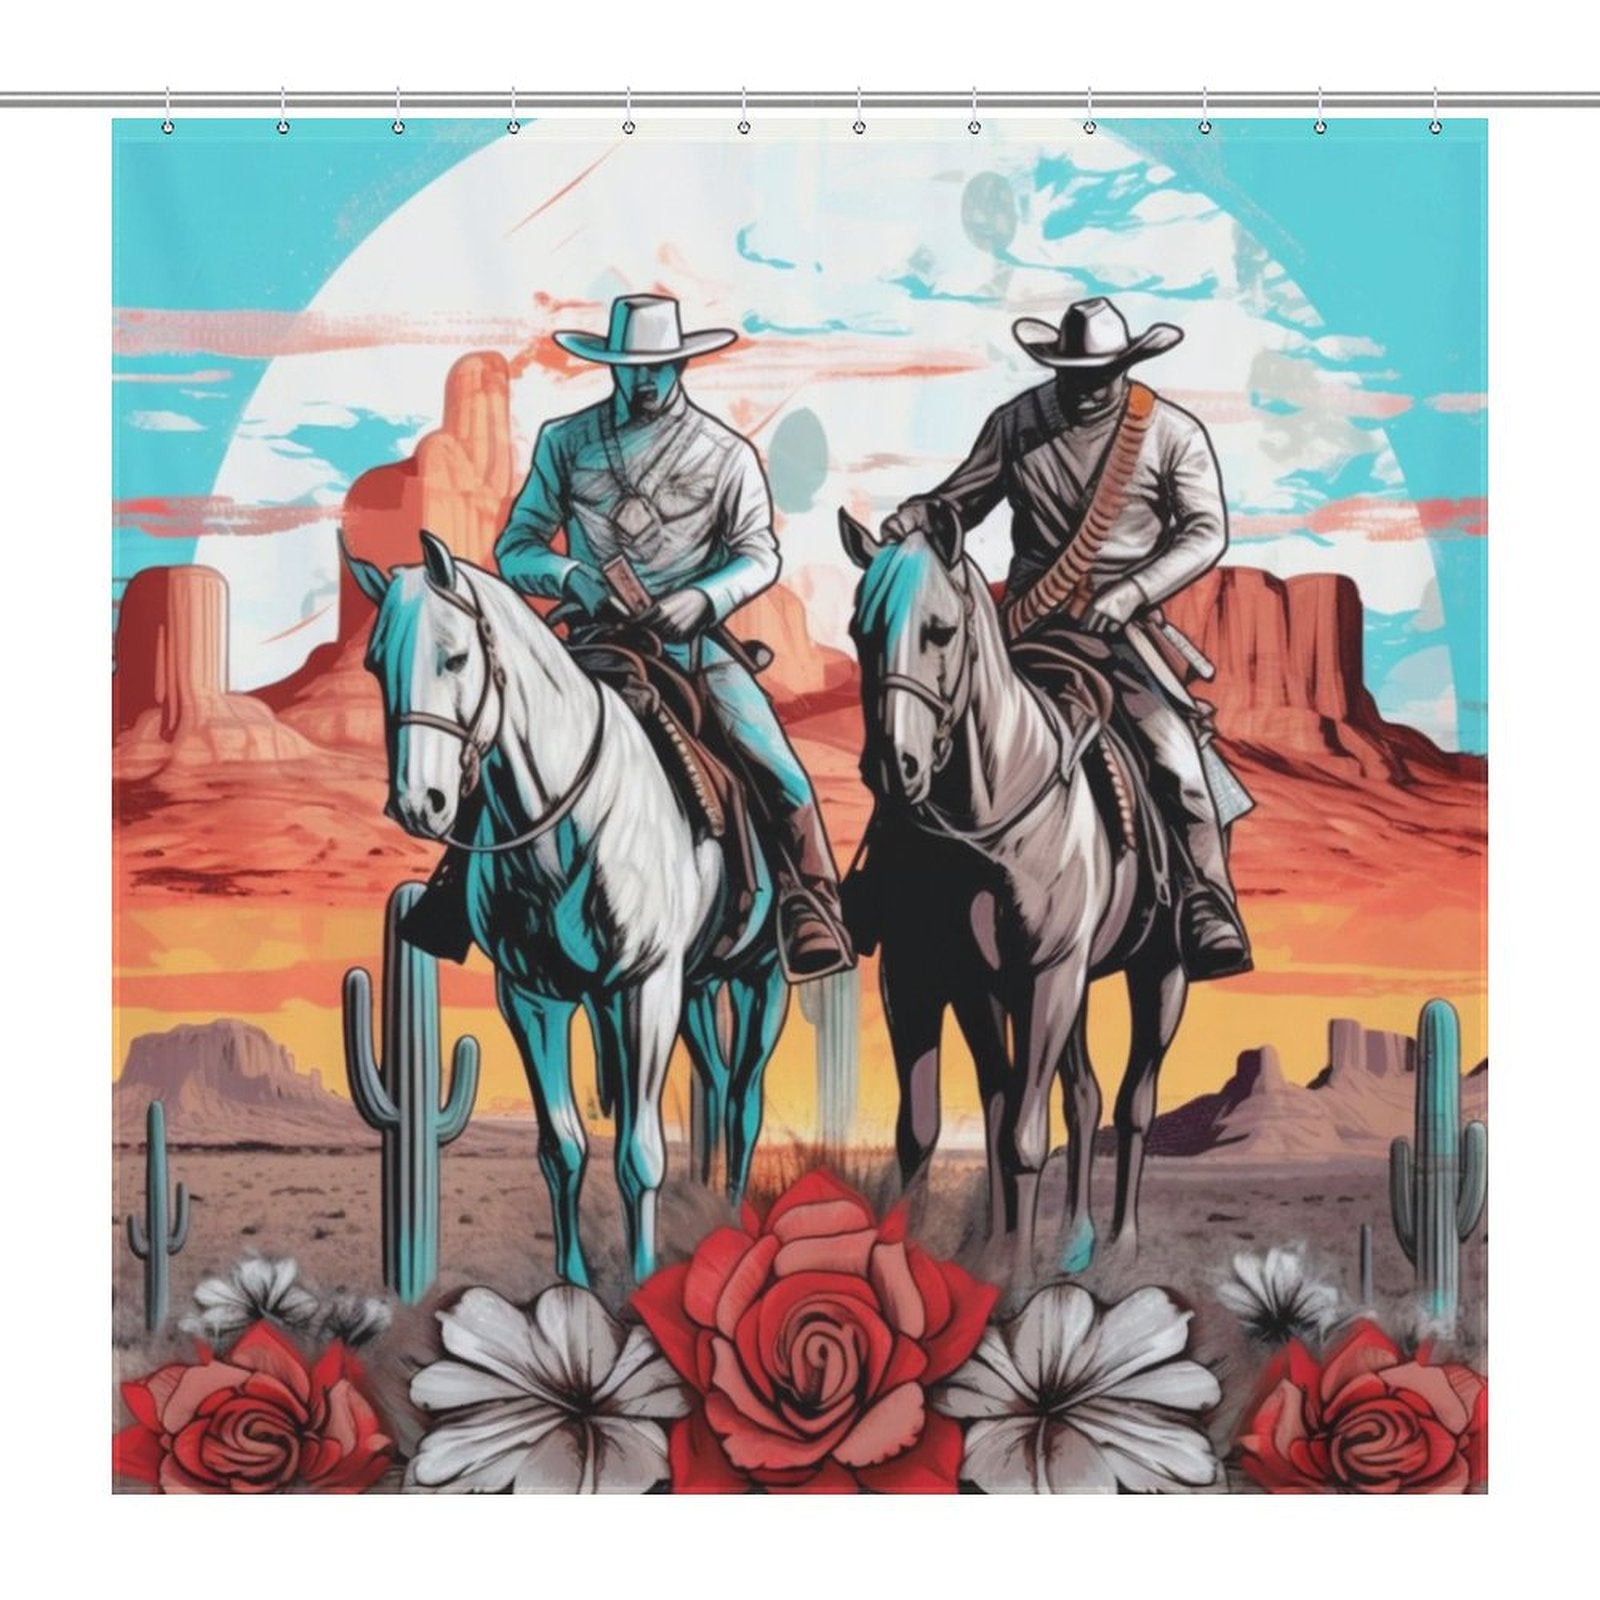 Two cowboys riding horses in a desert landscape with cacti and rock formations, set against a colorful background with large flowers at the bottom. One cowboy wears blue, the other grey. This Cowboy Riding Horses Western Shower Curtain-Cottoncat by Cotton Cat perfectly captures the essence of a Western-themed bathroom.